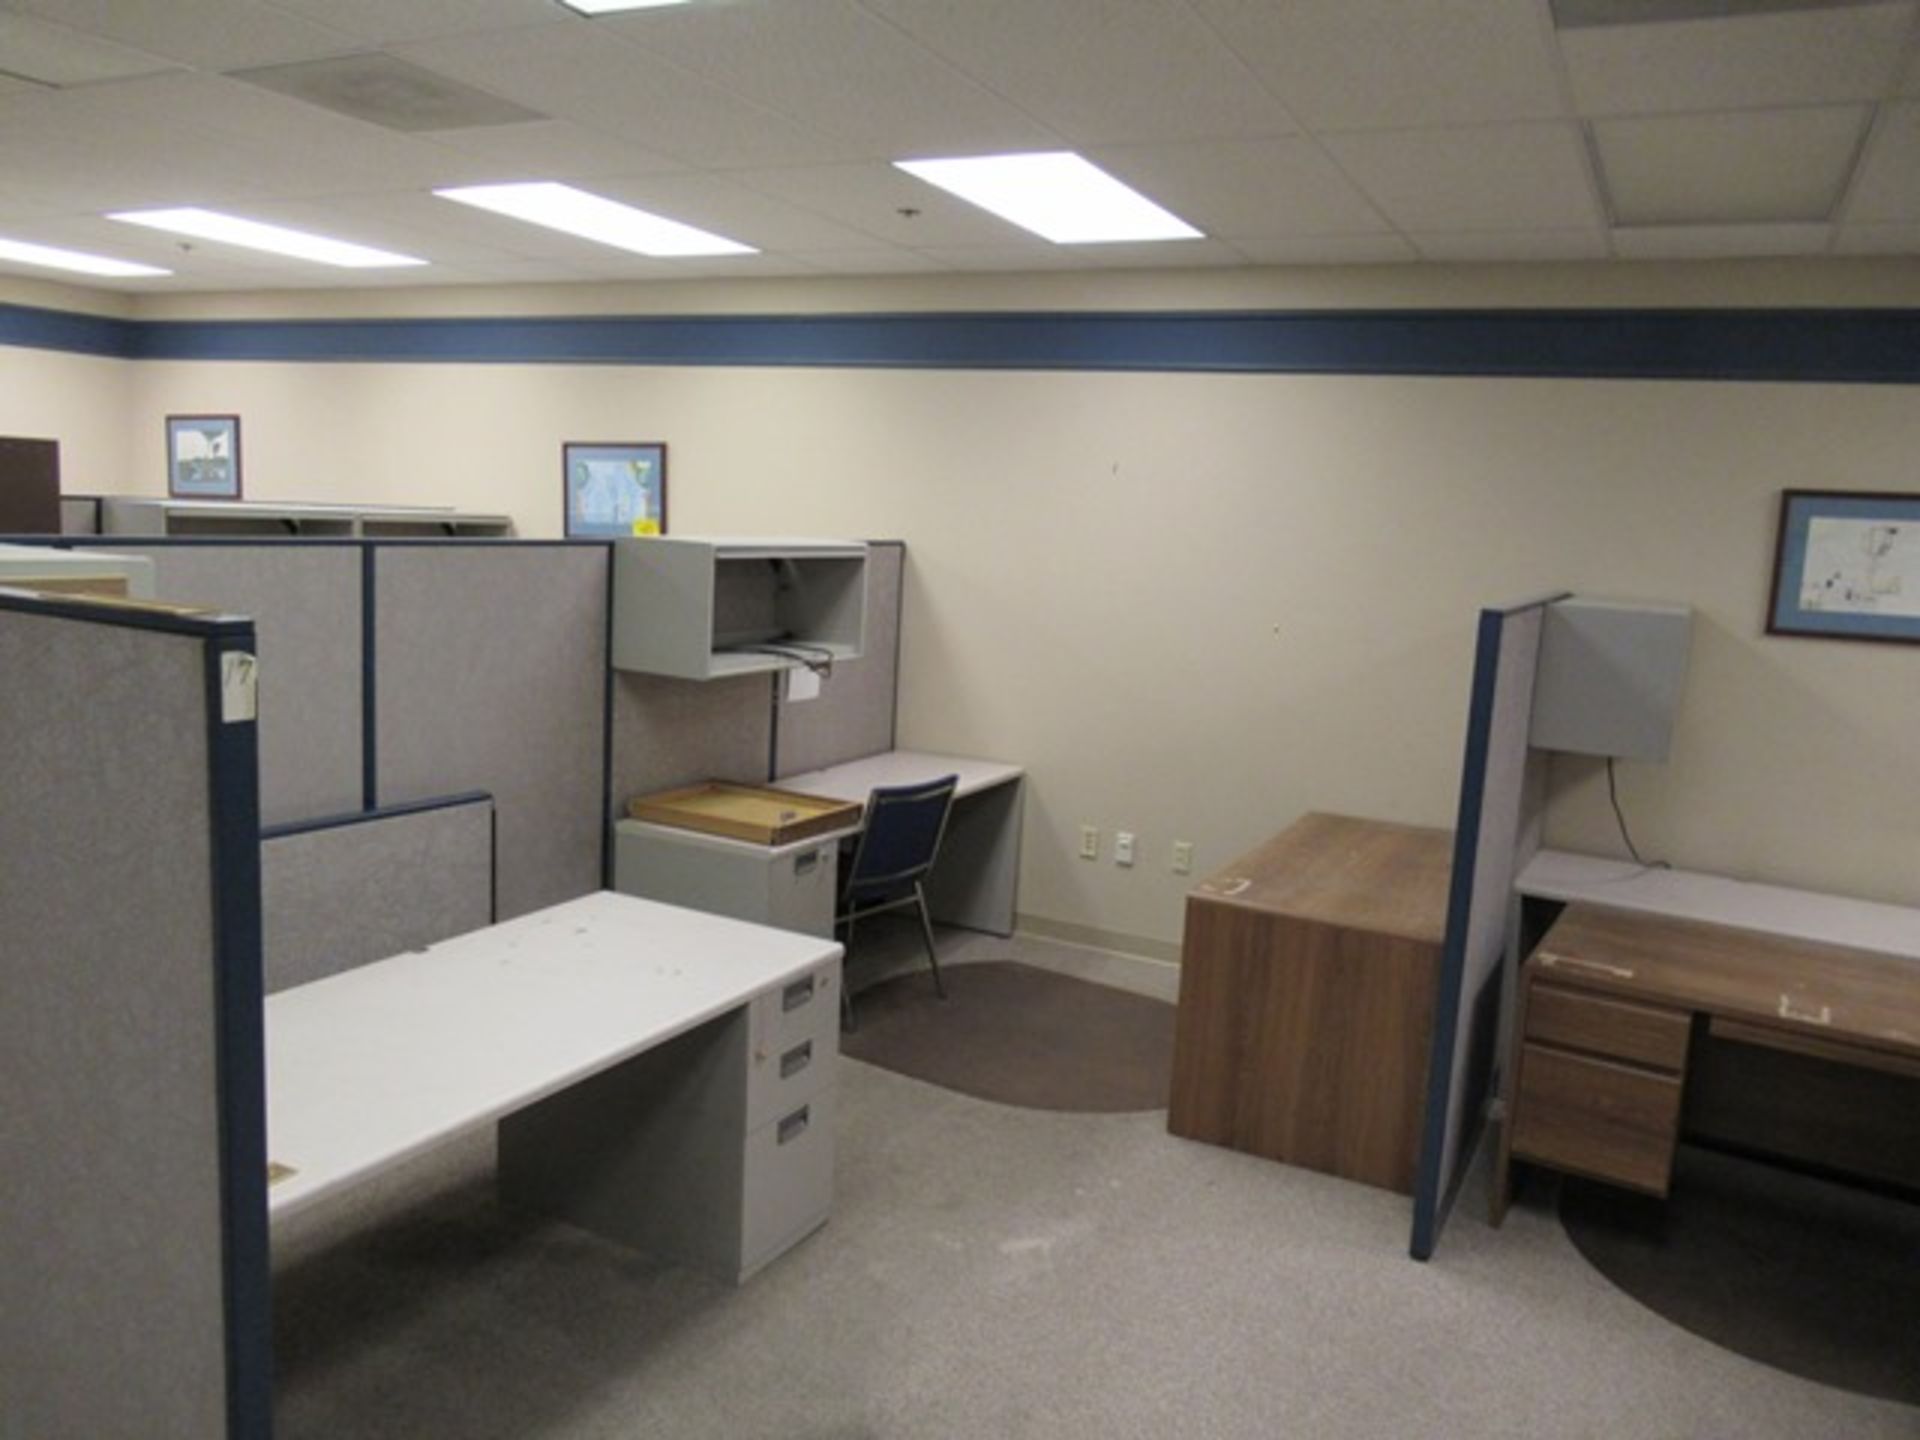 LOT ASST. OFFICE CUBICALS - DESK, CHAIRS, ETC. (MO2NDF) - Image 2 of 3